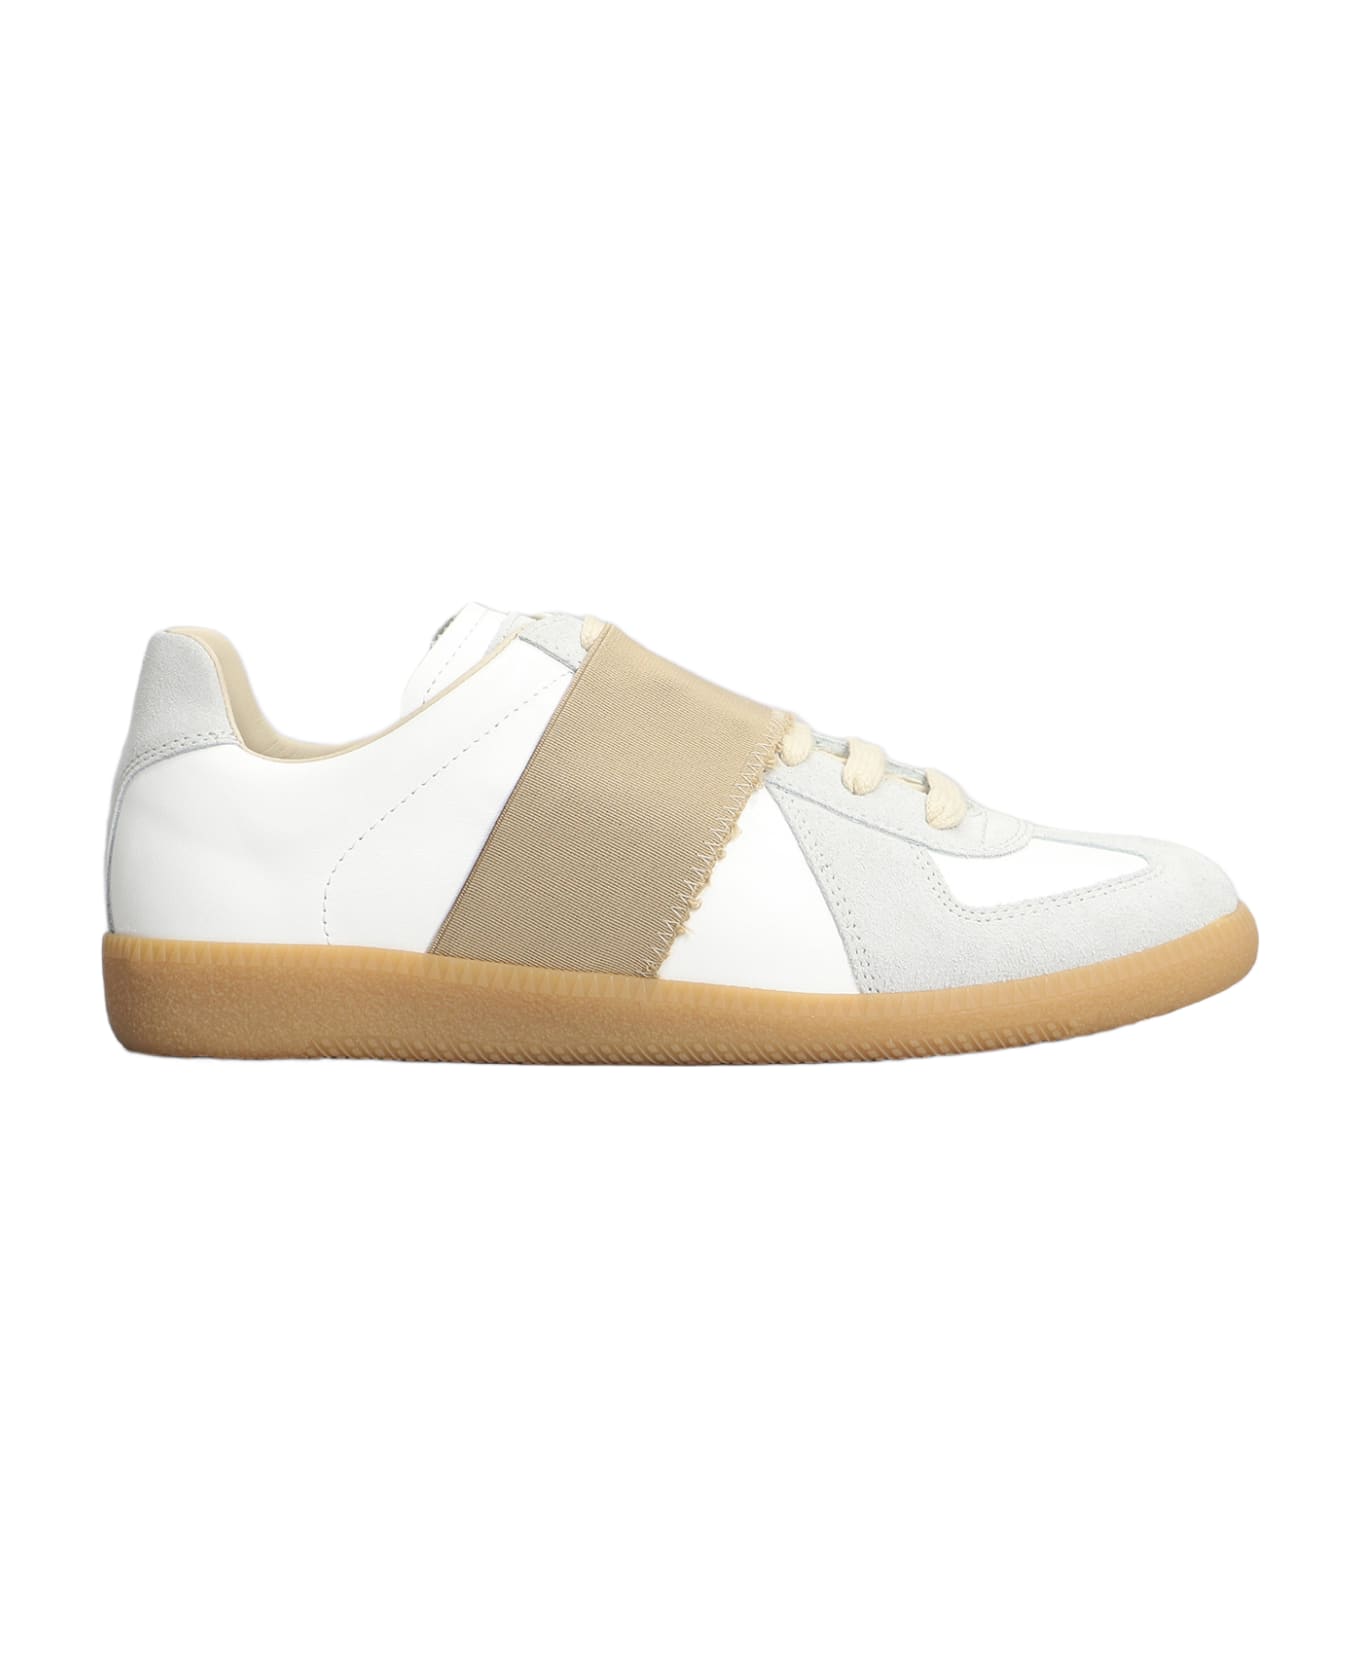 Maison Margiela Replica Sneakers In White Suede And Leather - white スニーカー